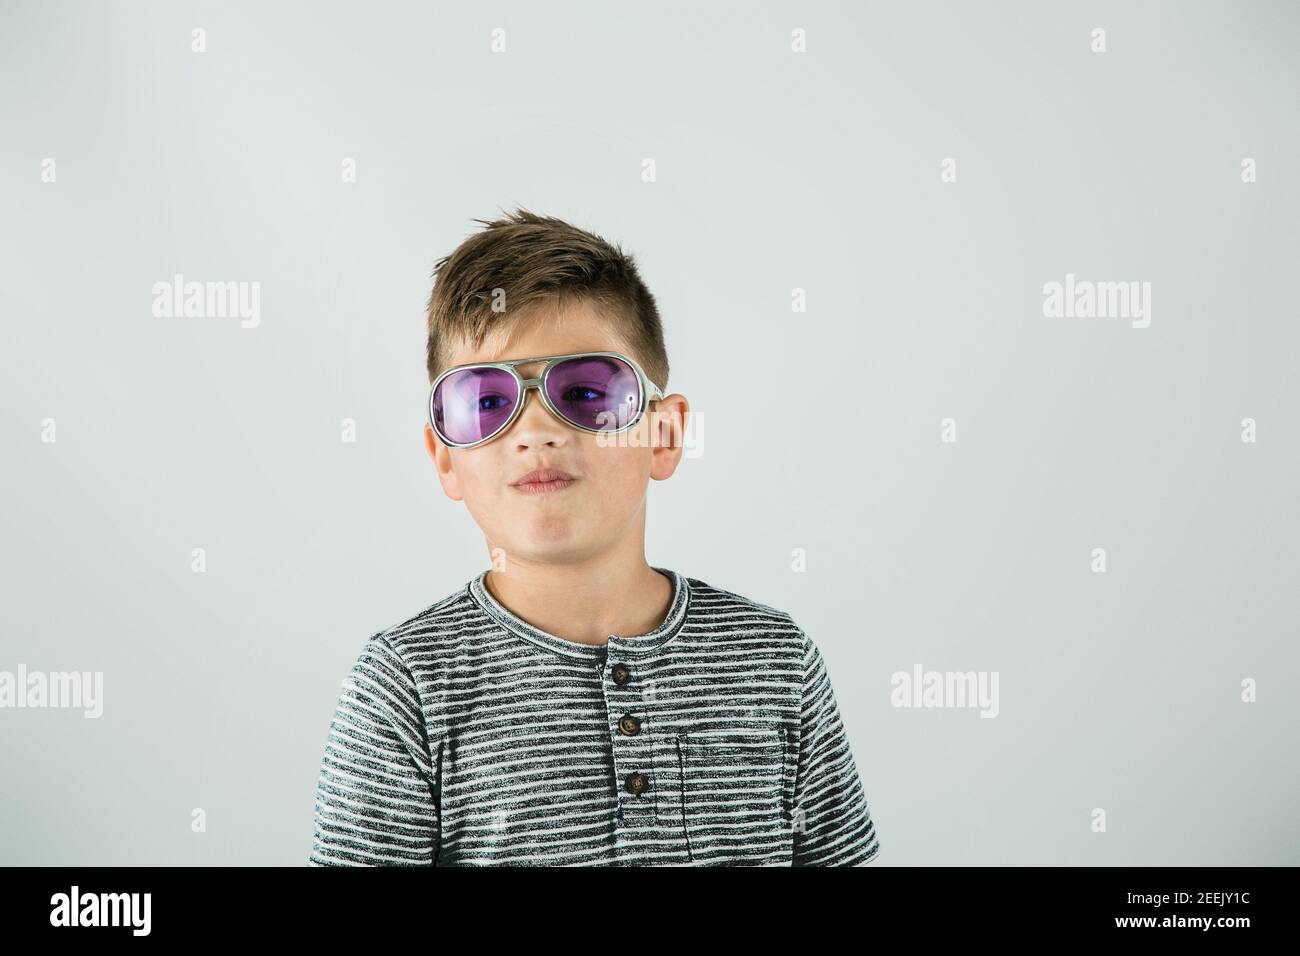 Little caucasian boy standing in a studio setting on a white backdrop with rock star purple sunglasses and attitude. Stock Photo